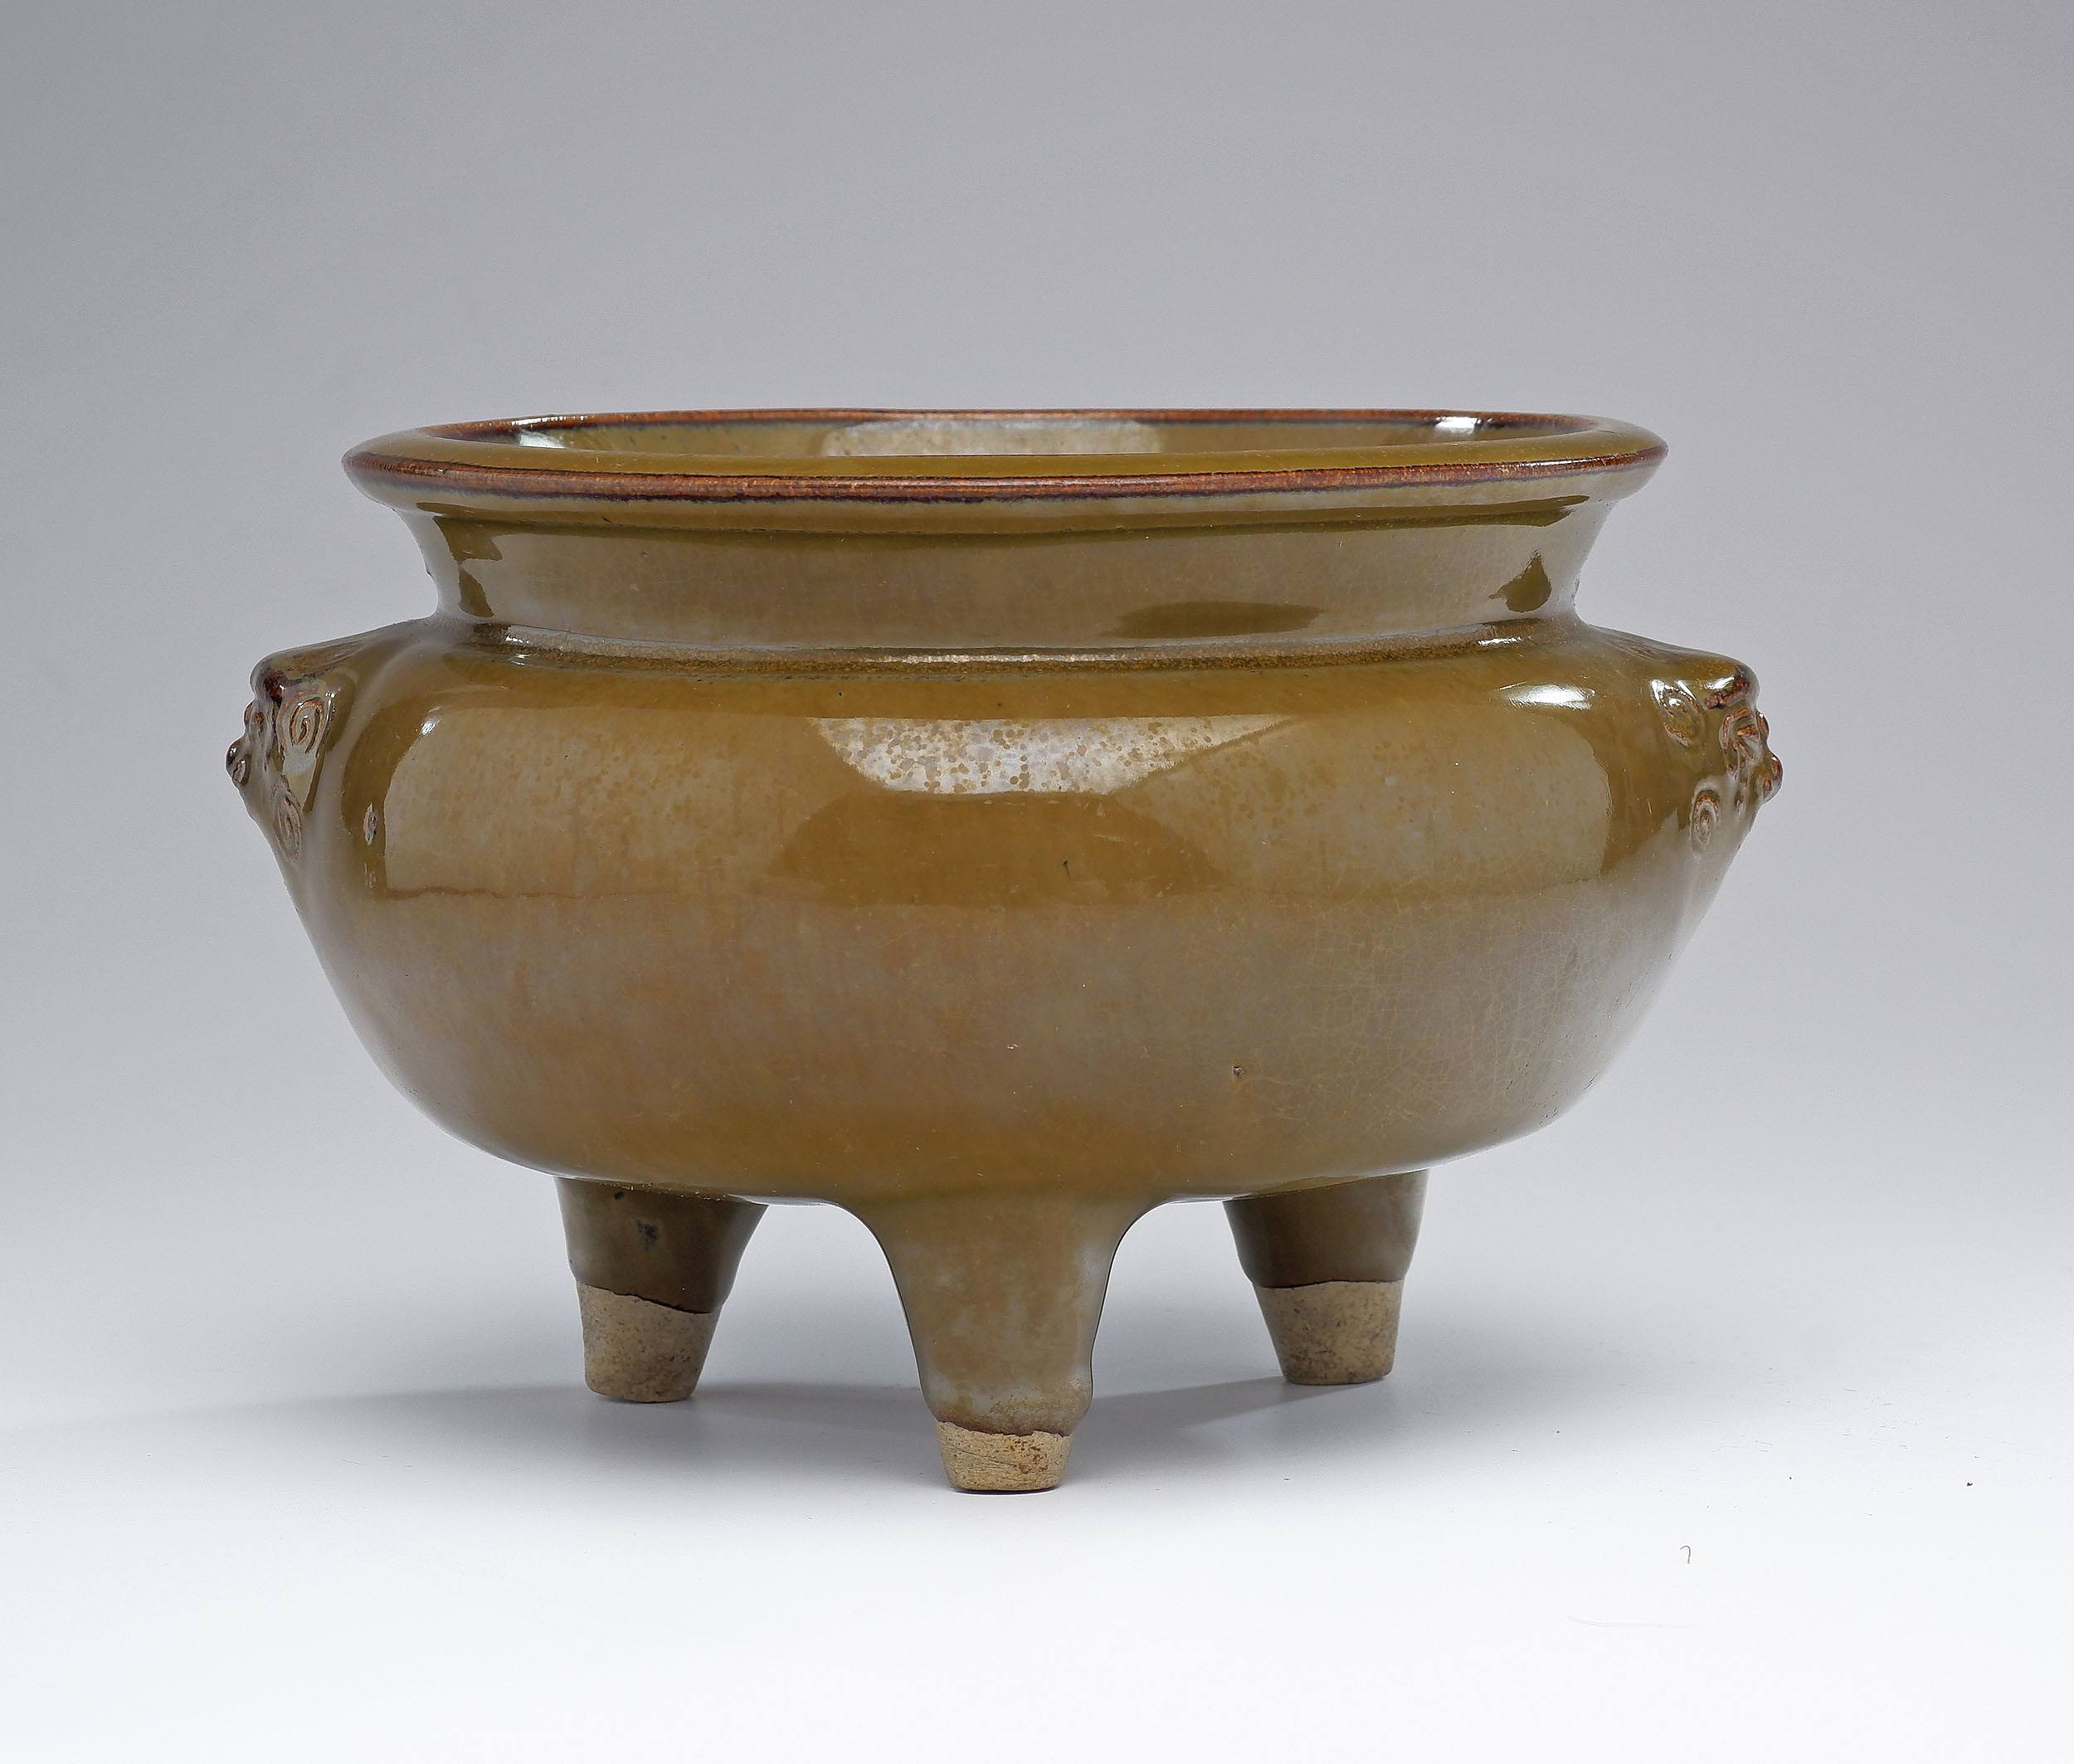 'Chinese Teadust and Iron Glaze Tripod Censer with Lions Head Masks, Qing Dynasty, Possibly Shiwan Ware'